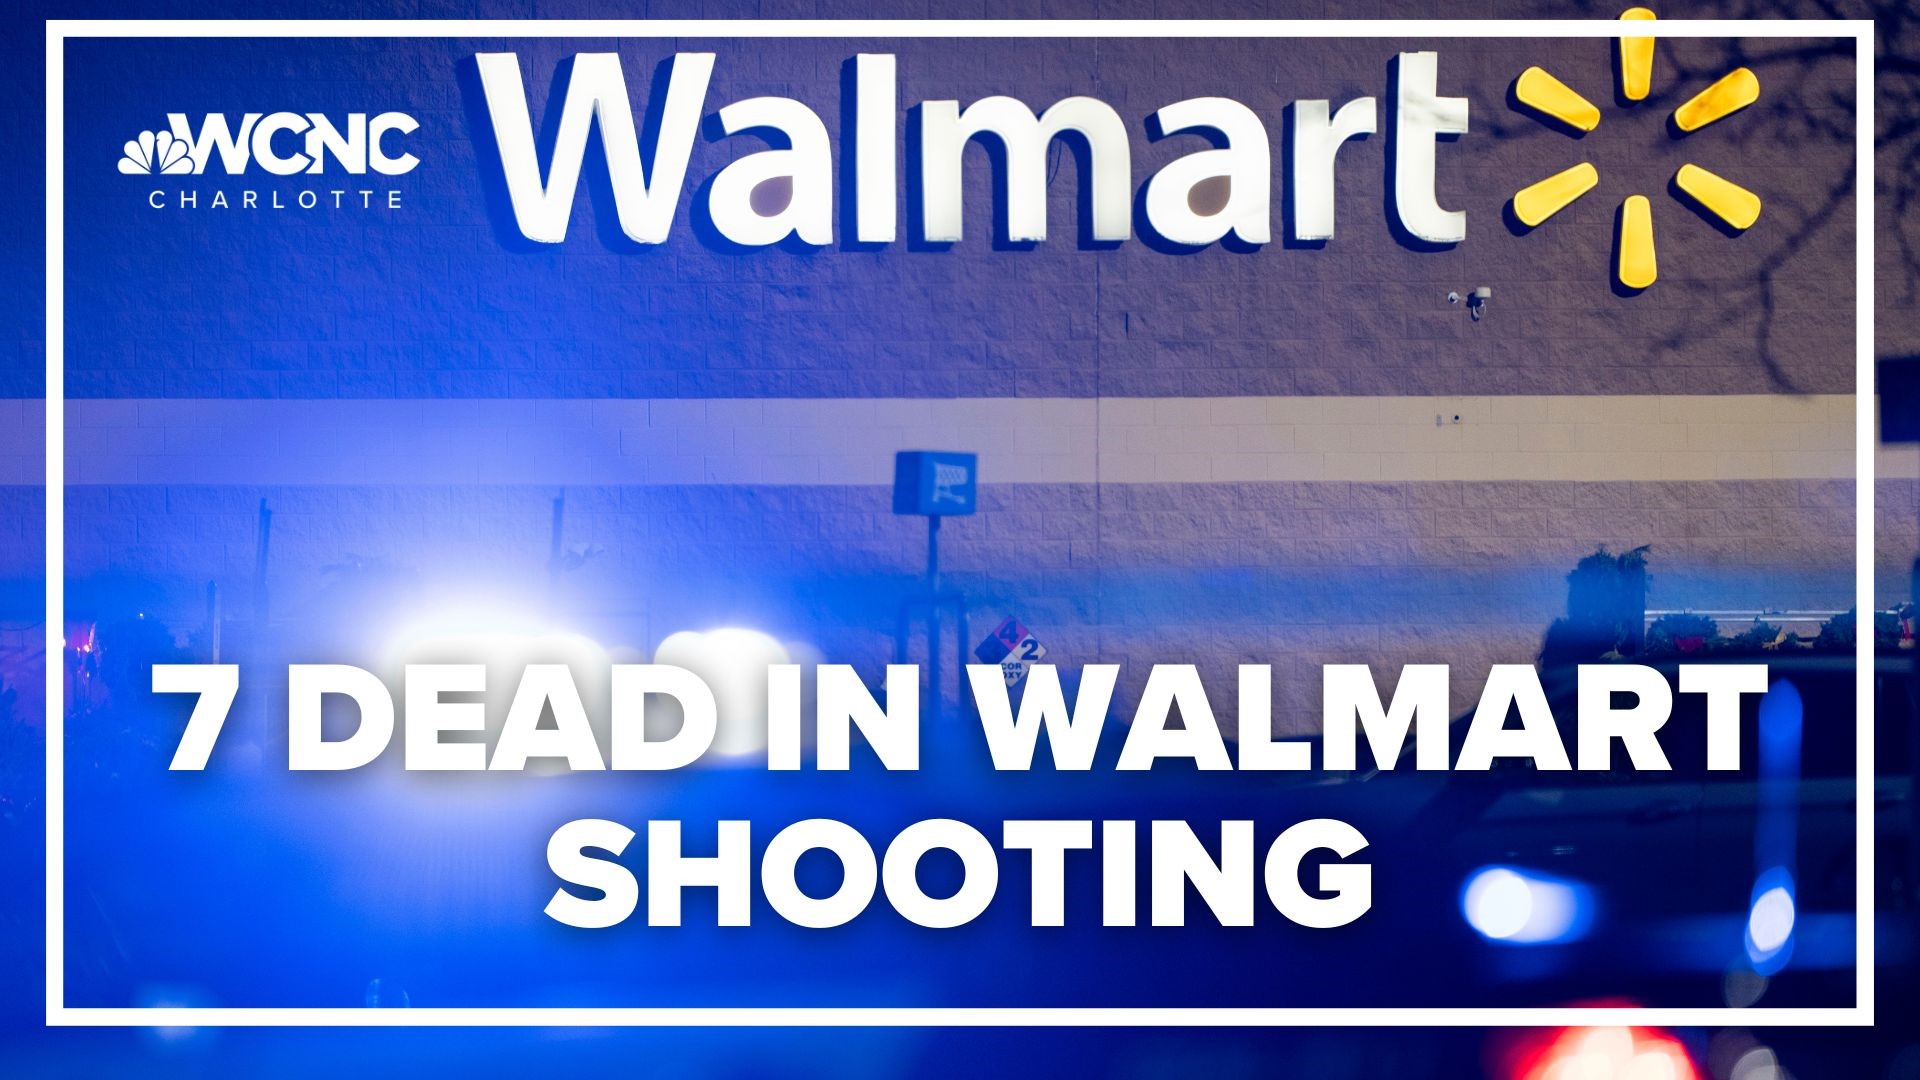 Authorities confirmed seven people were killed, including the gunman, in a mass shooting at a Walmart store in Chesapeake, Virginia.